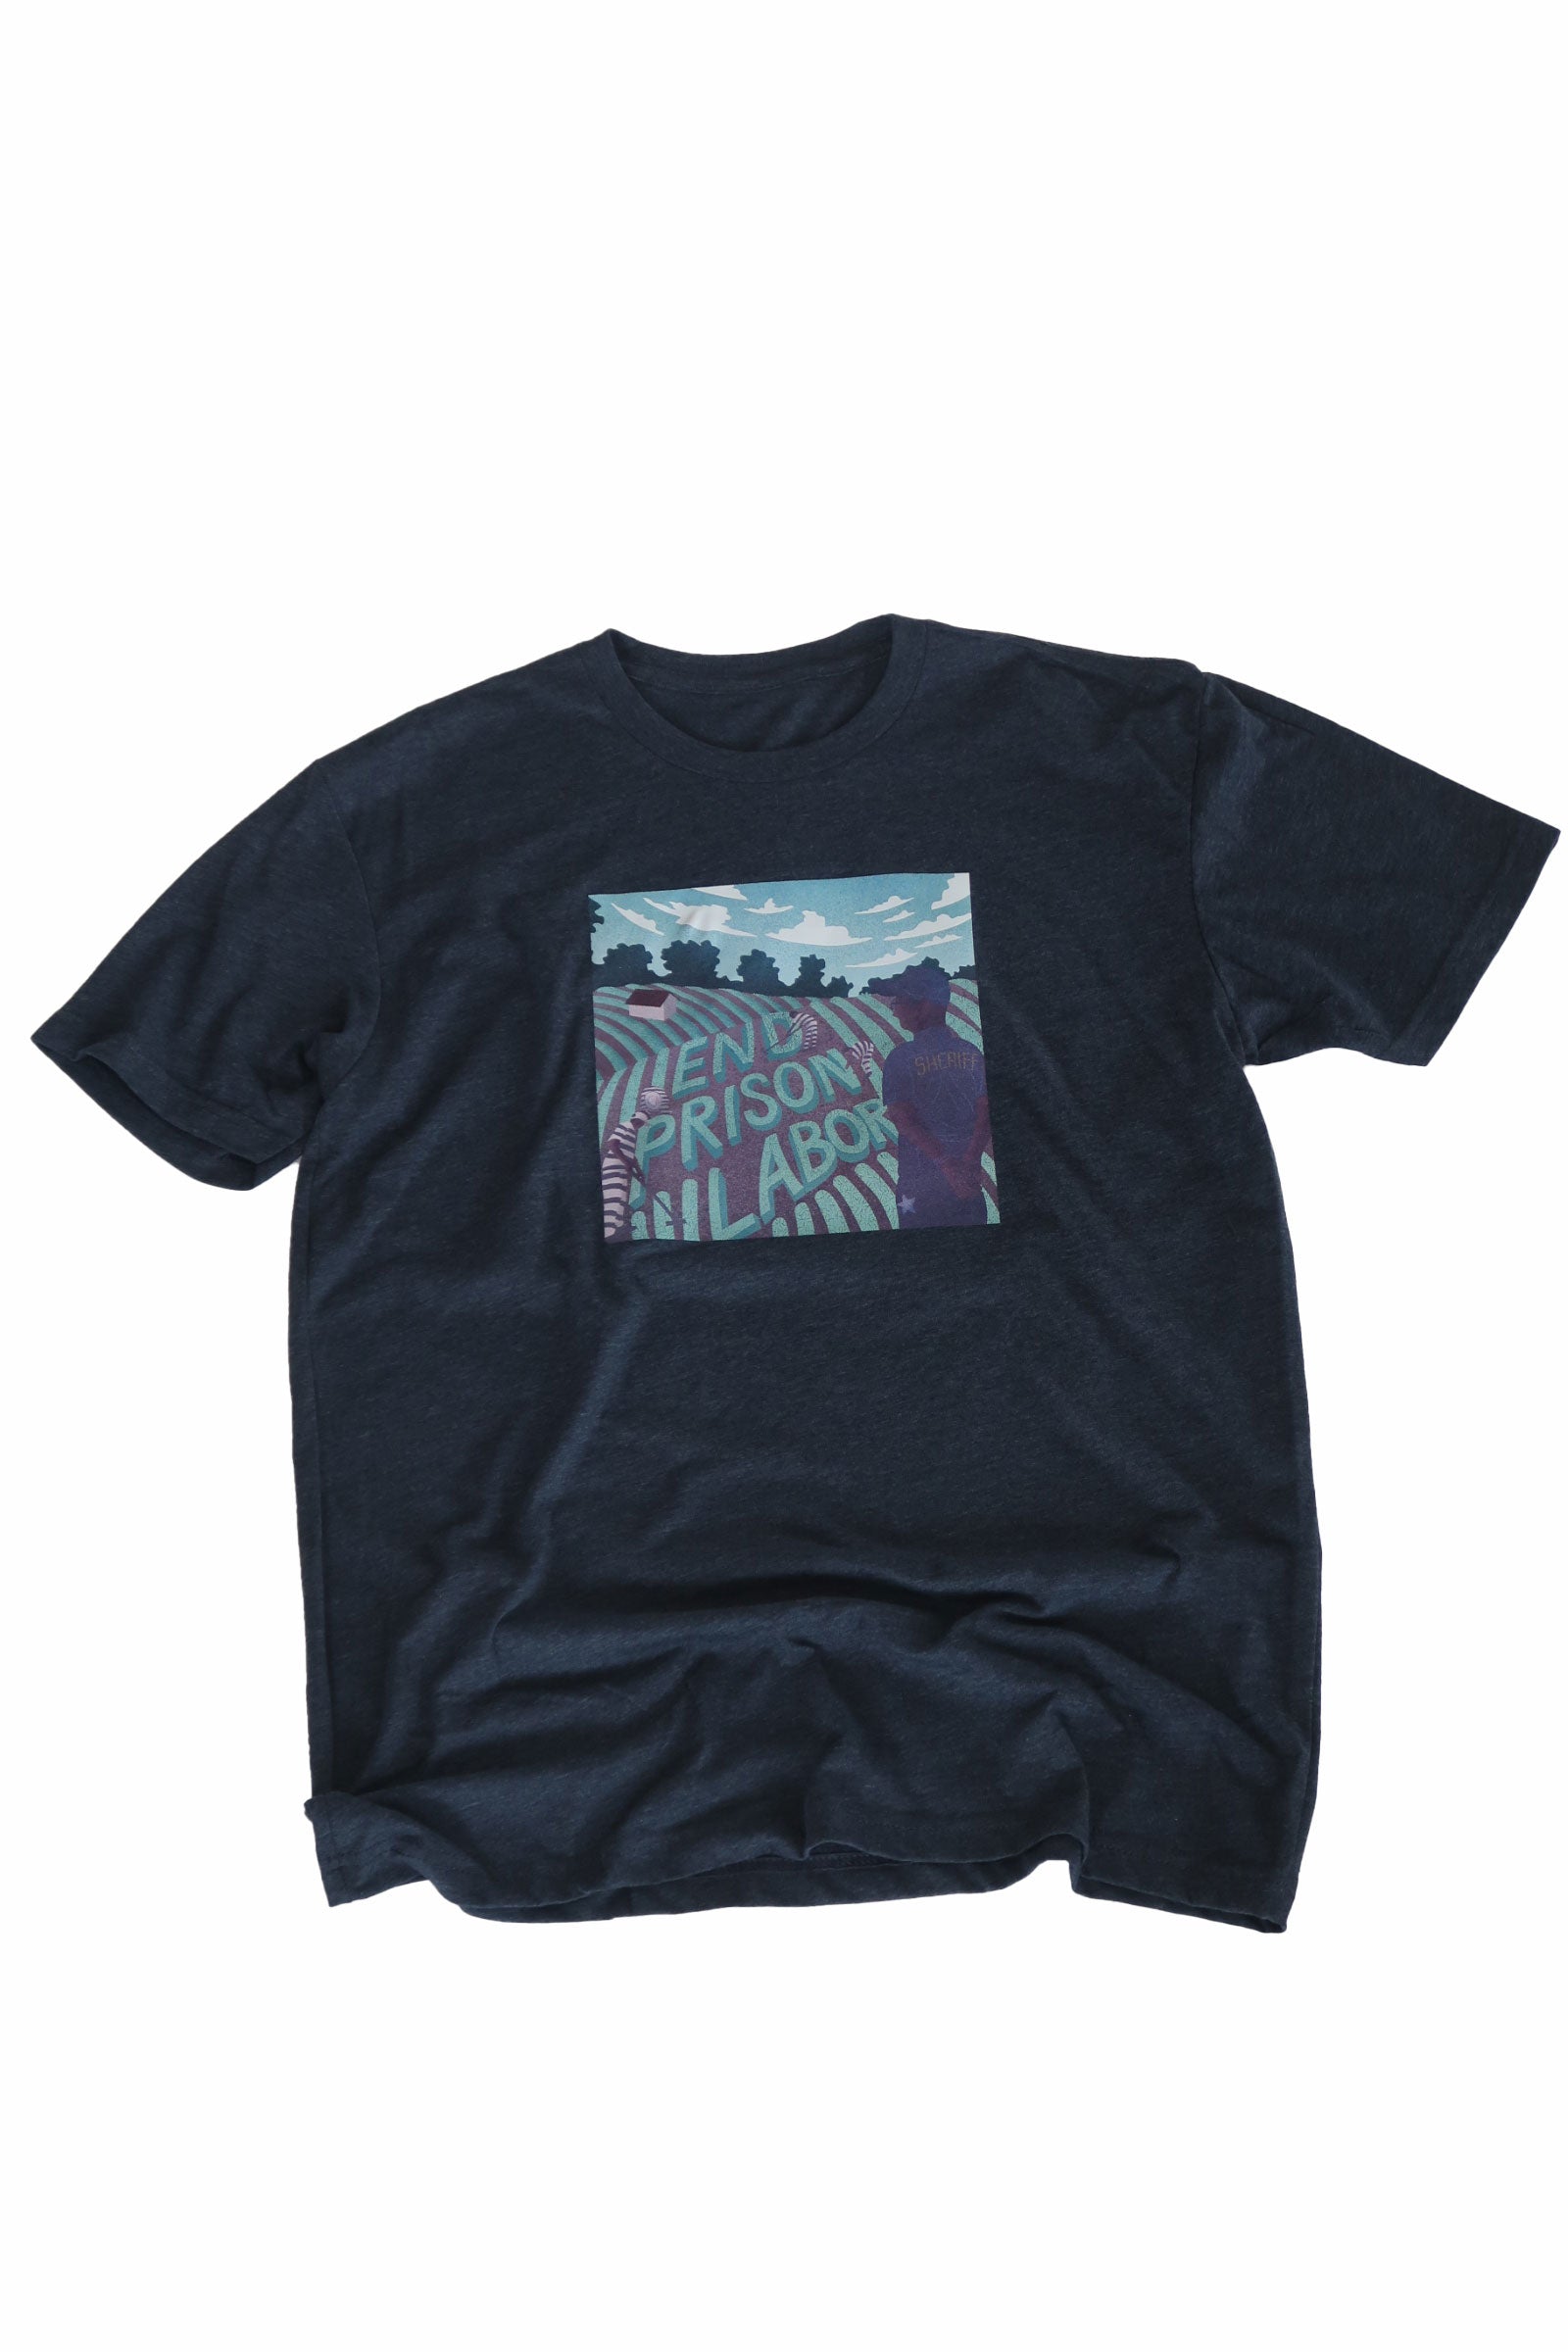 End Prison Labor Illustration Shirt in Navy - Trunk Series